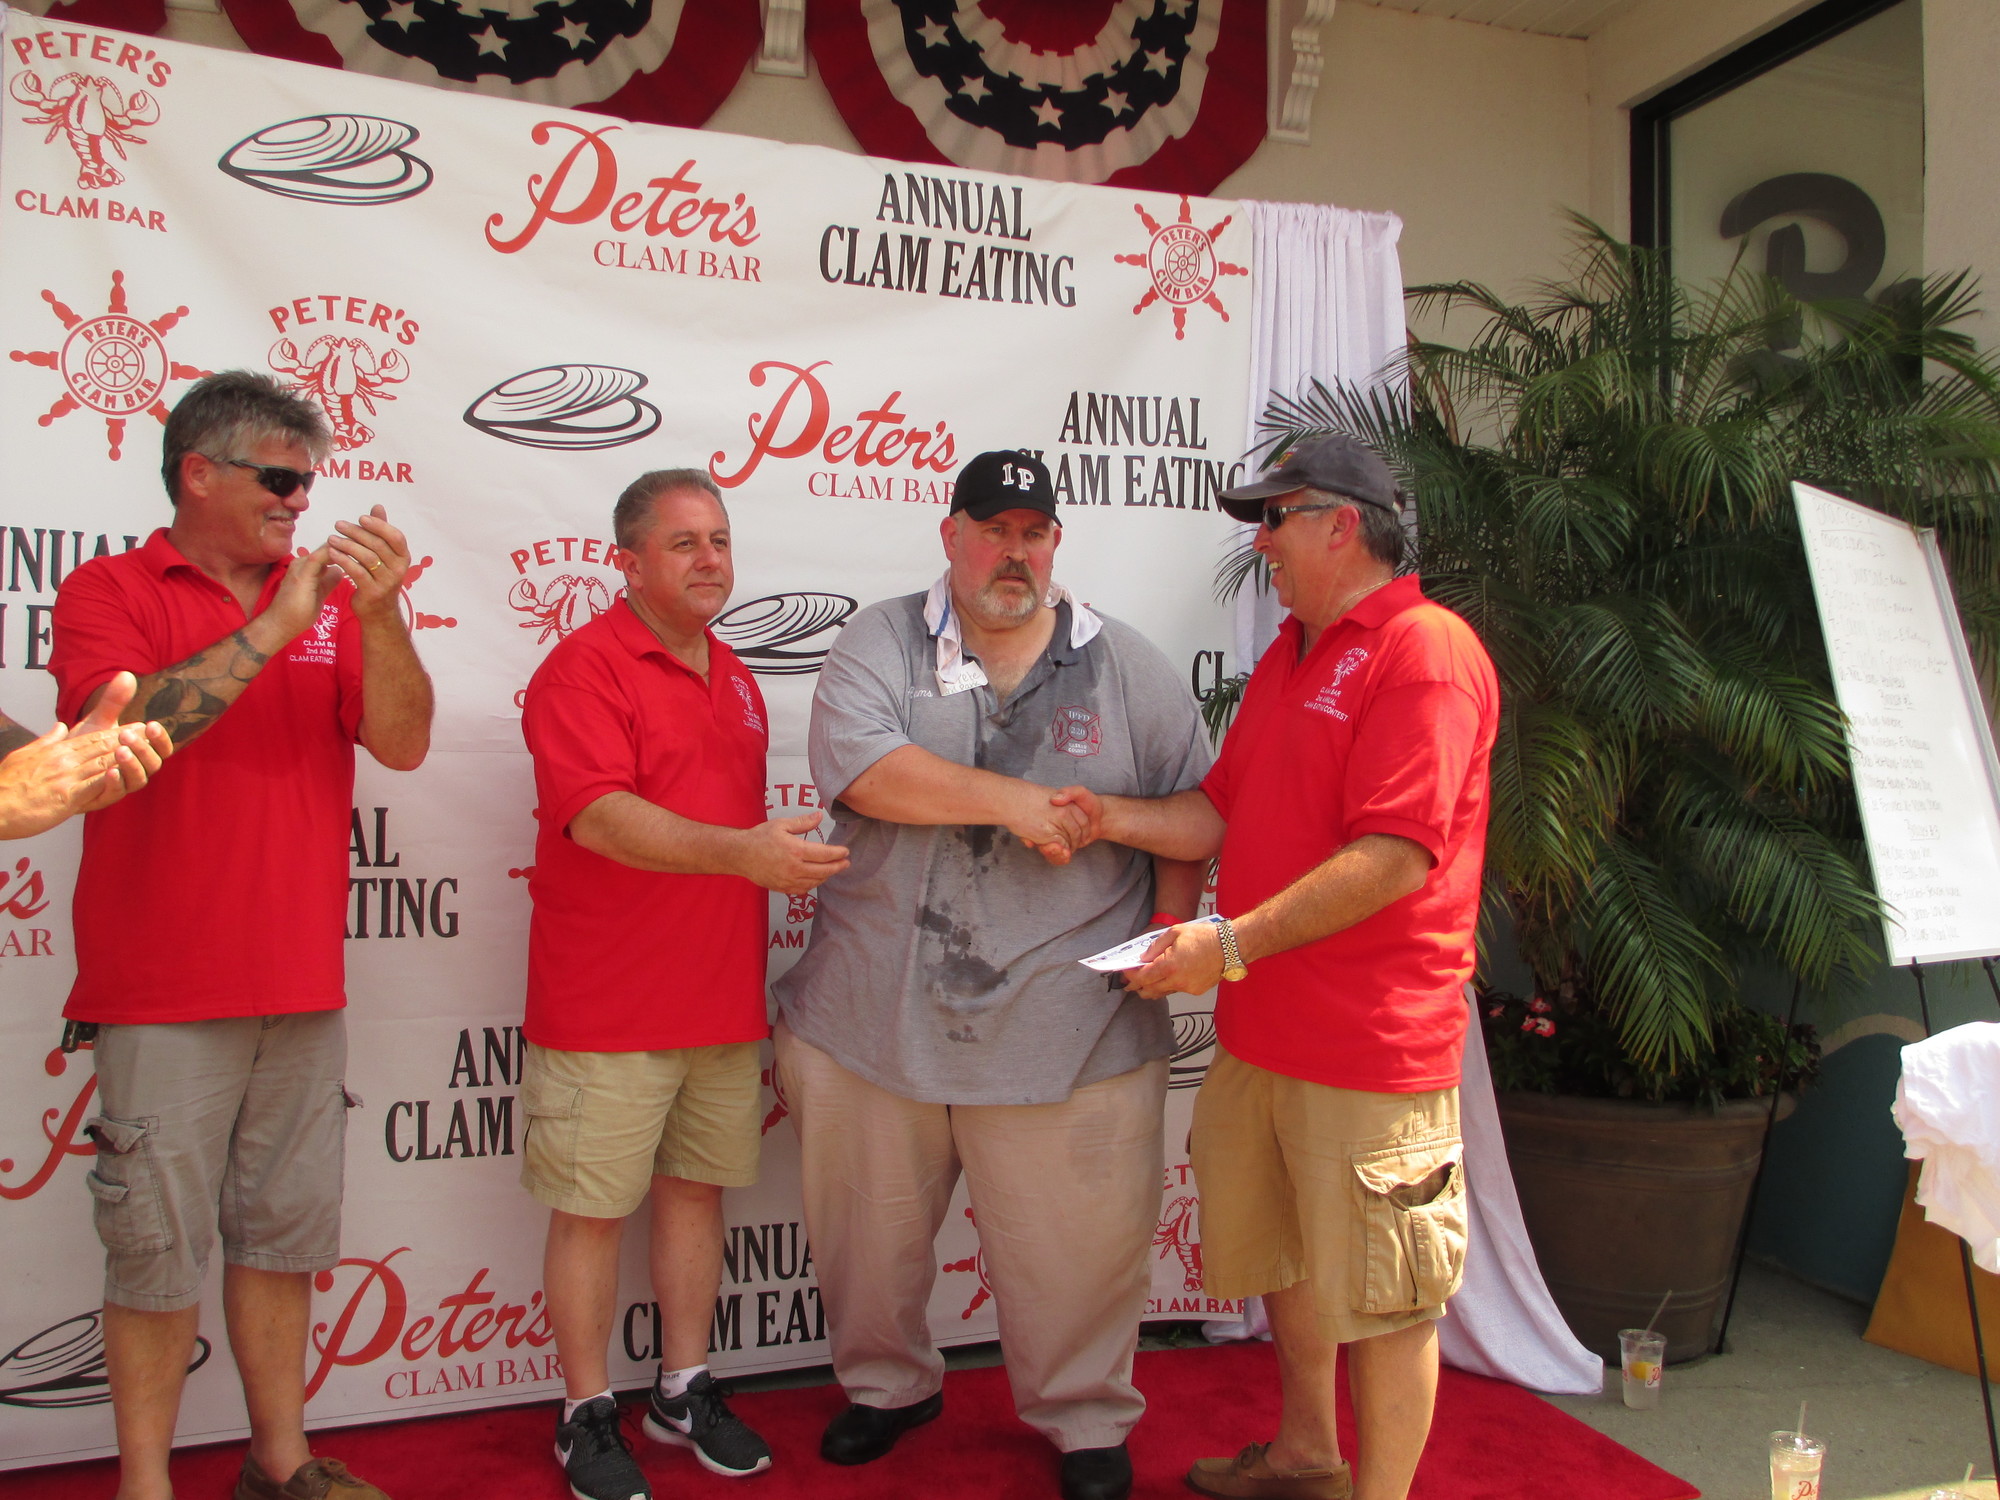 The winner, Pete Adams, center, of the Island Park F.D., was congratulated by Peter’s owner Butch Yamali, left, and Chief Ed Madden of the IPFD, right.